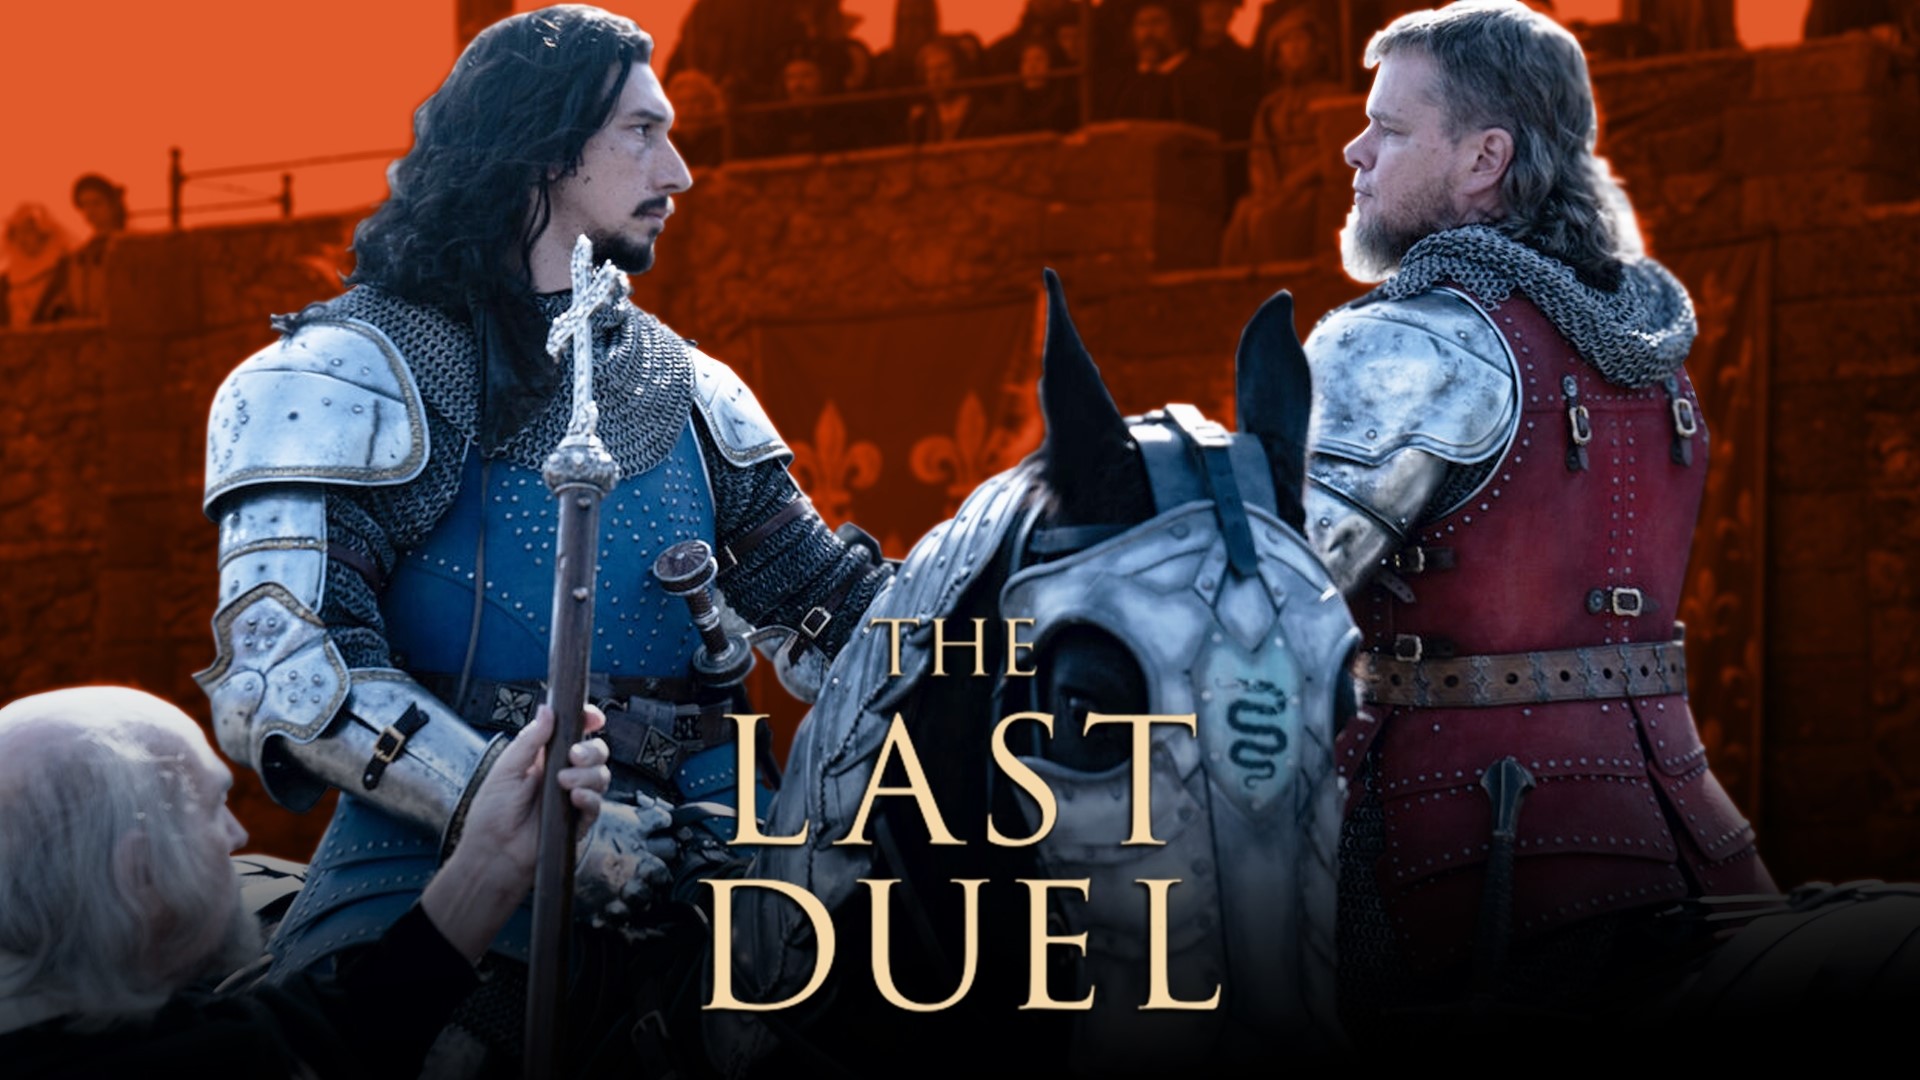 Told from multiple perspectives surrounding the rape of a woman, The Last Duel weaves a great drama about misogyny and bravado all through the lens of a medieval due